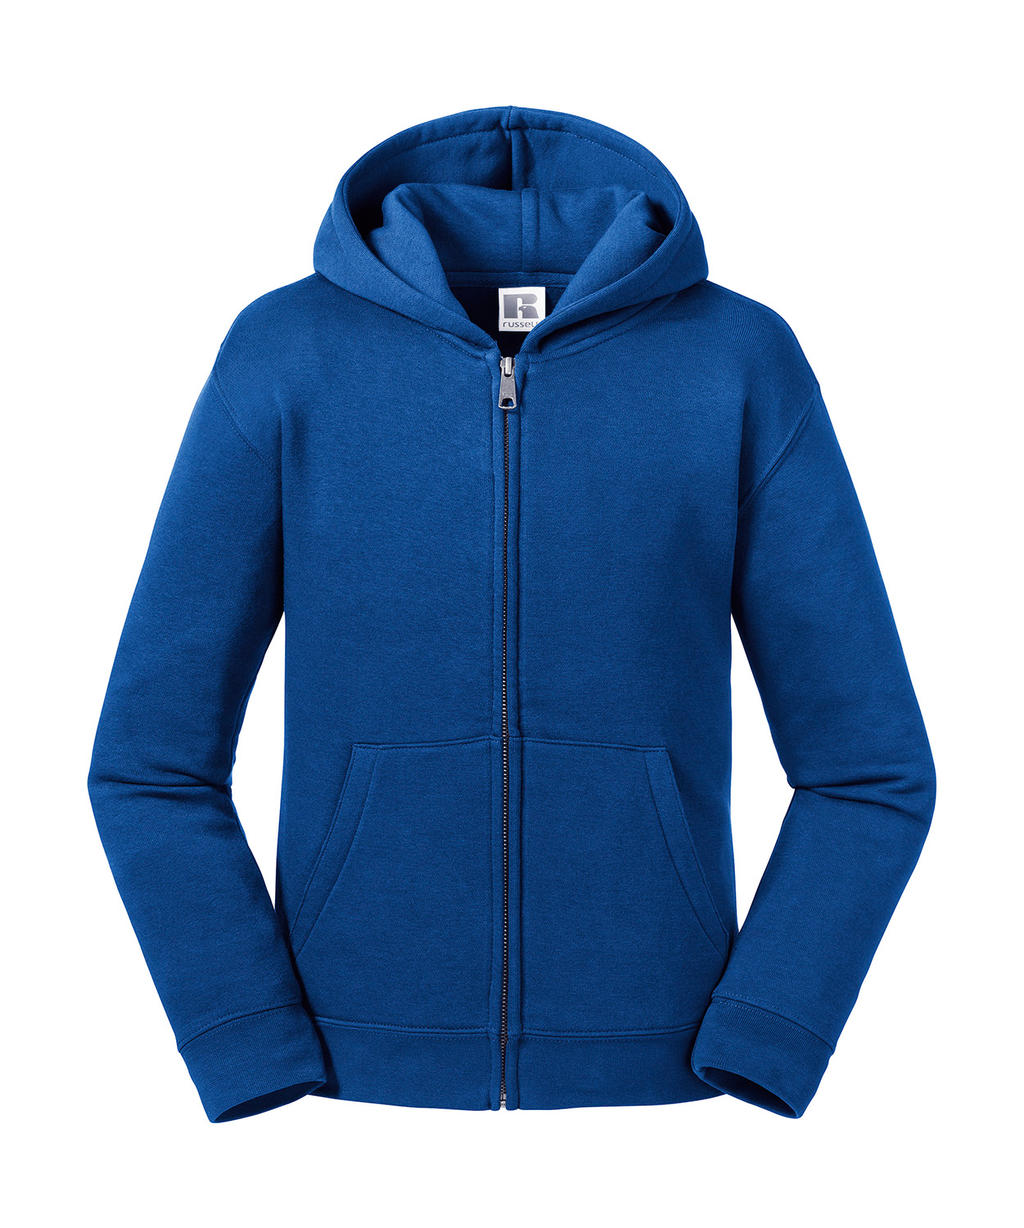  Kids Authentic Zipped Hood Sweat in Farbe Bright Royal